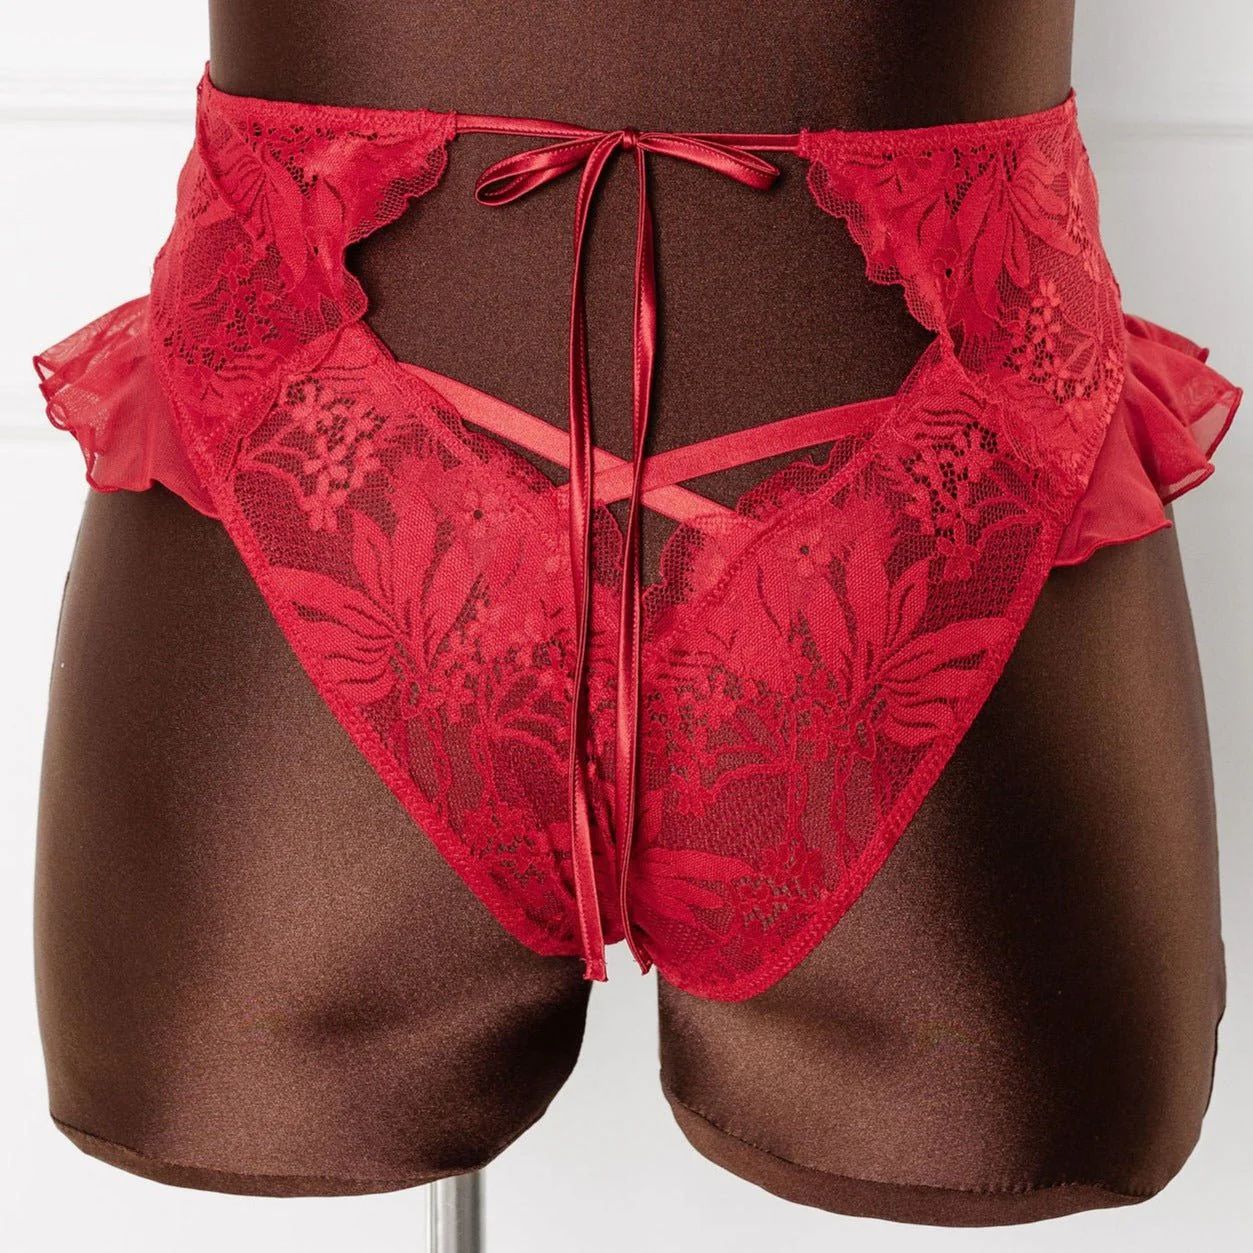 Lacy High Leg Crotchless Panty - Scarlet Red | Mentionables